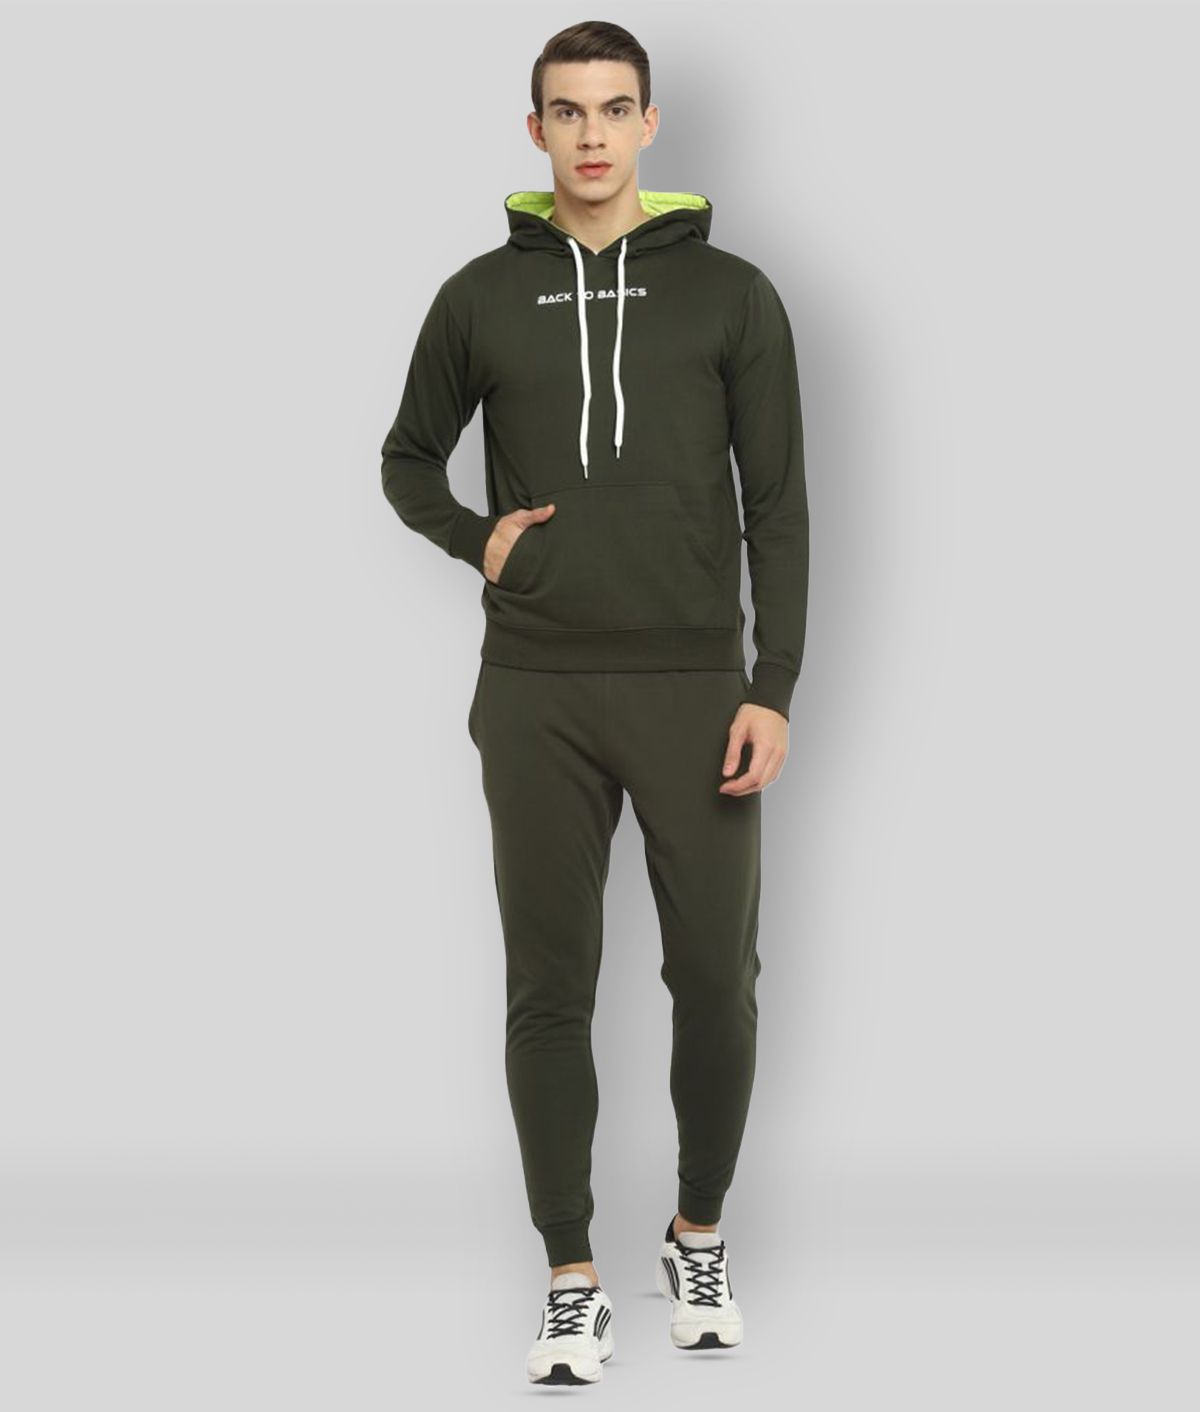     			OFF LIMITS - Green Fleece Regular Fit Solid Men's Sports Tracksuit ( Pack of 1 )